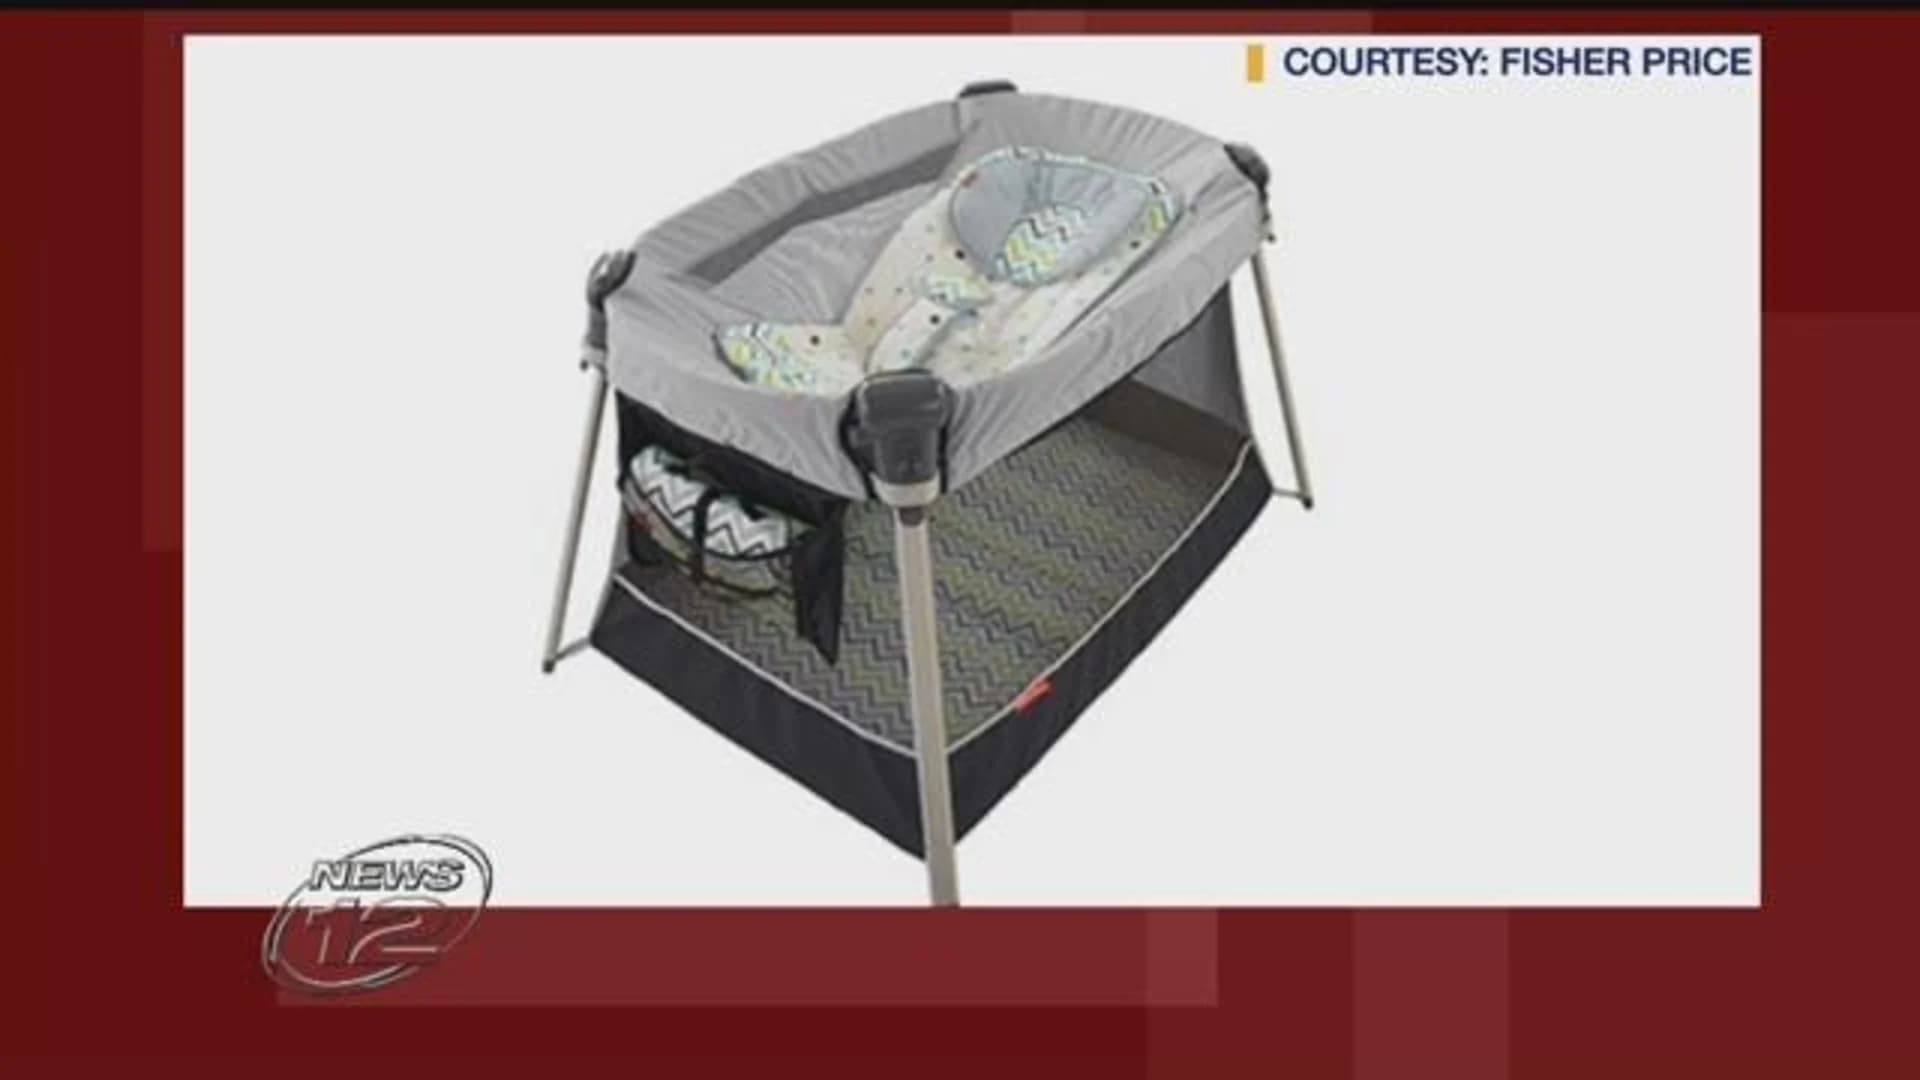 Fisher-Price recalls 71,000 inclined infant sleepers